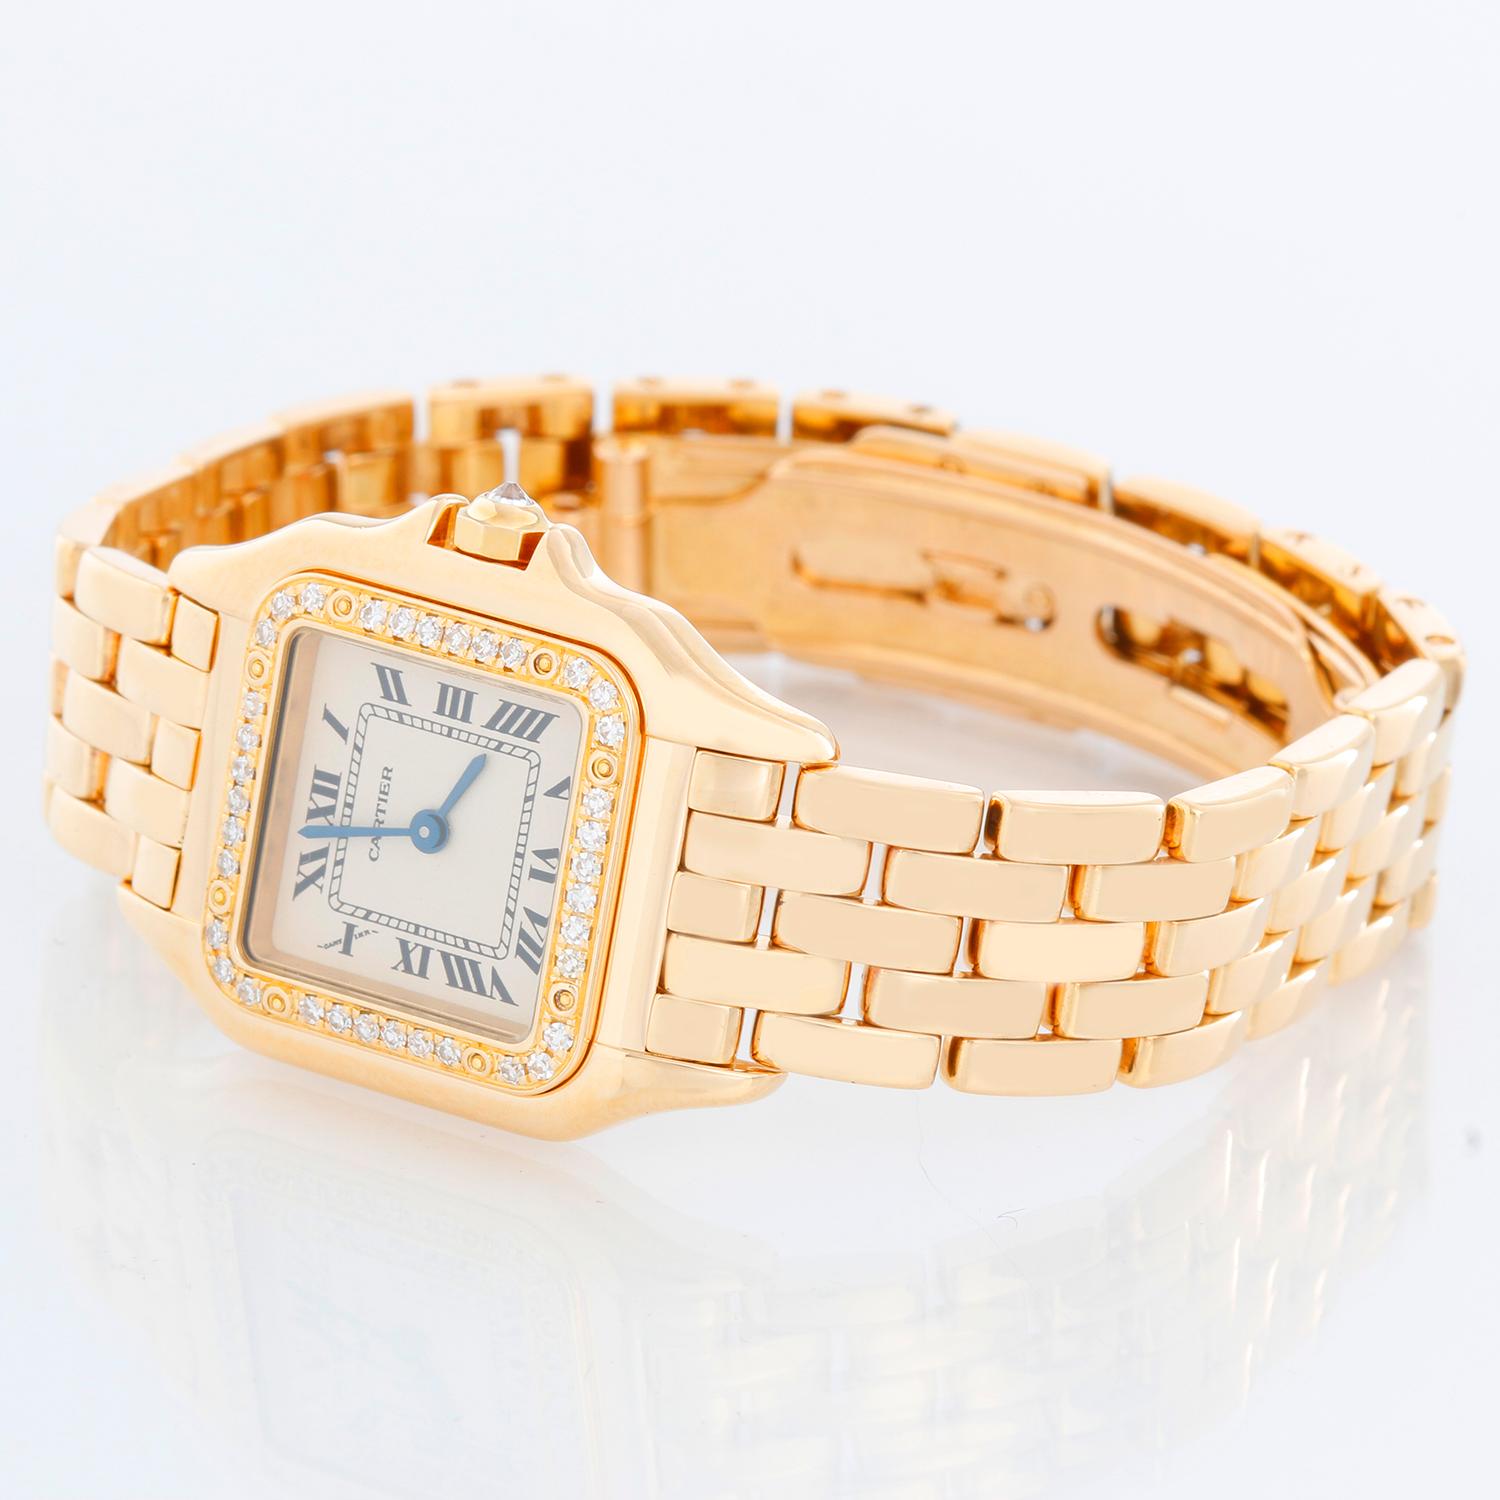 Cartier 18K Yellow Gold Panther Ladies Watch WF3254B9 1280 - Quartz. 18K Yellow Gold with diamonds (30 x 21 mm) ; Diamond bezel . Ivory dial with black Roman numerals. 18K Yellow Gold Panther bracelet with deployant buckle. Pre-owned with Cartier